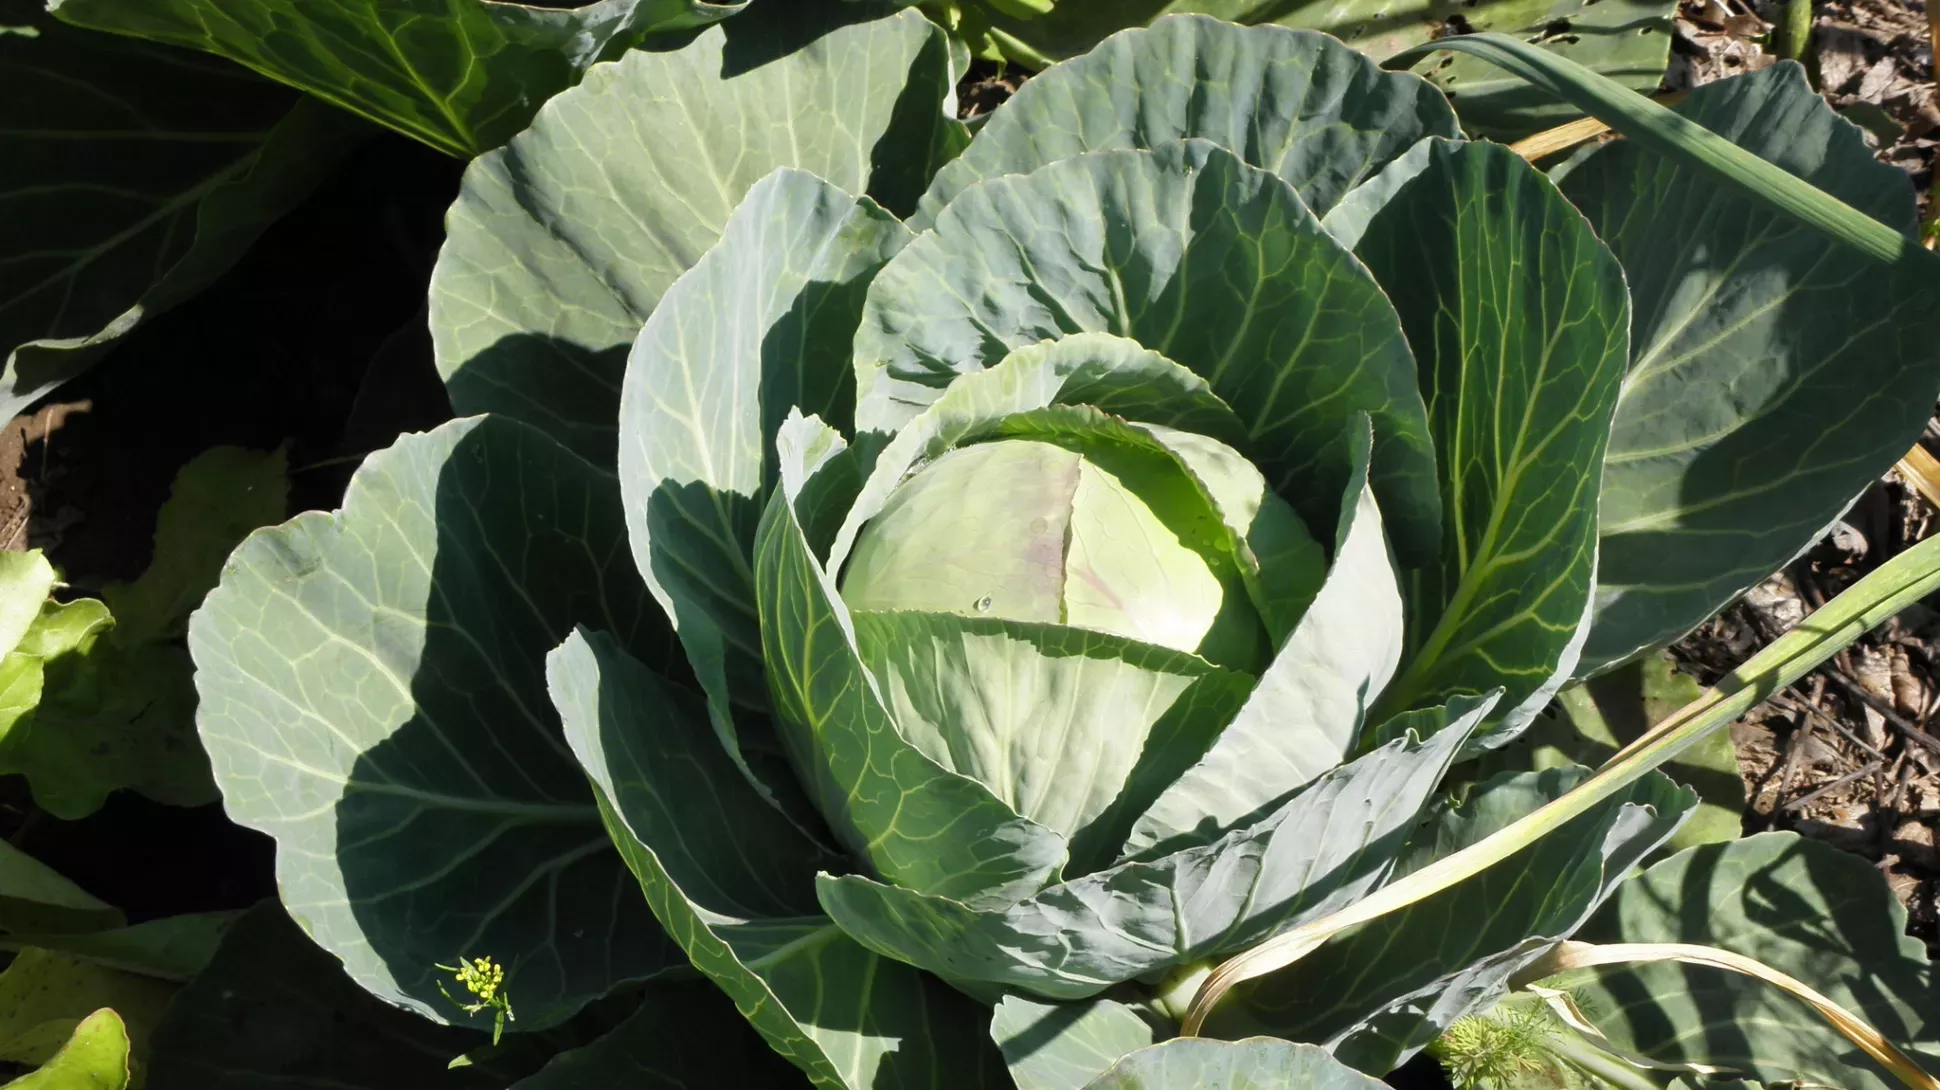 A green cabbage with large fleshy leaves